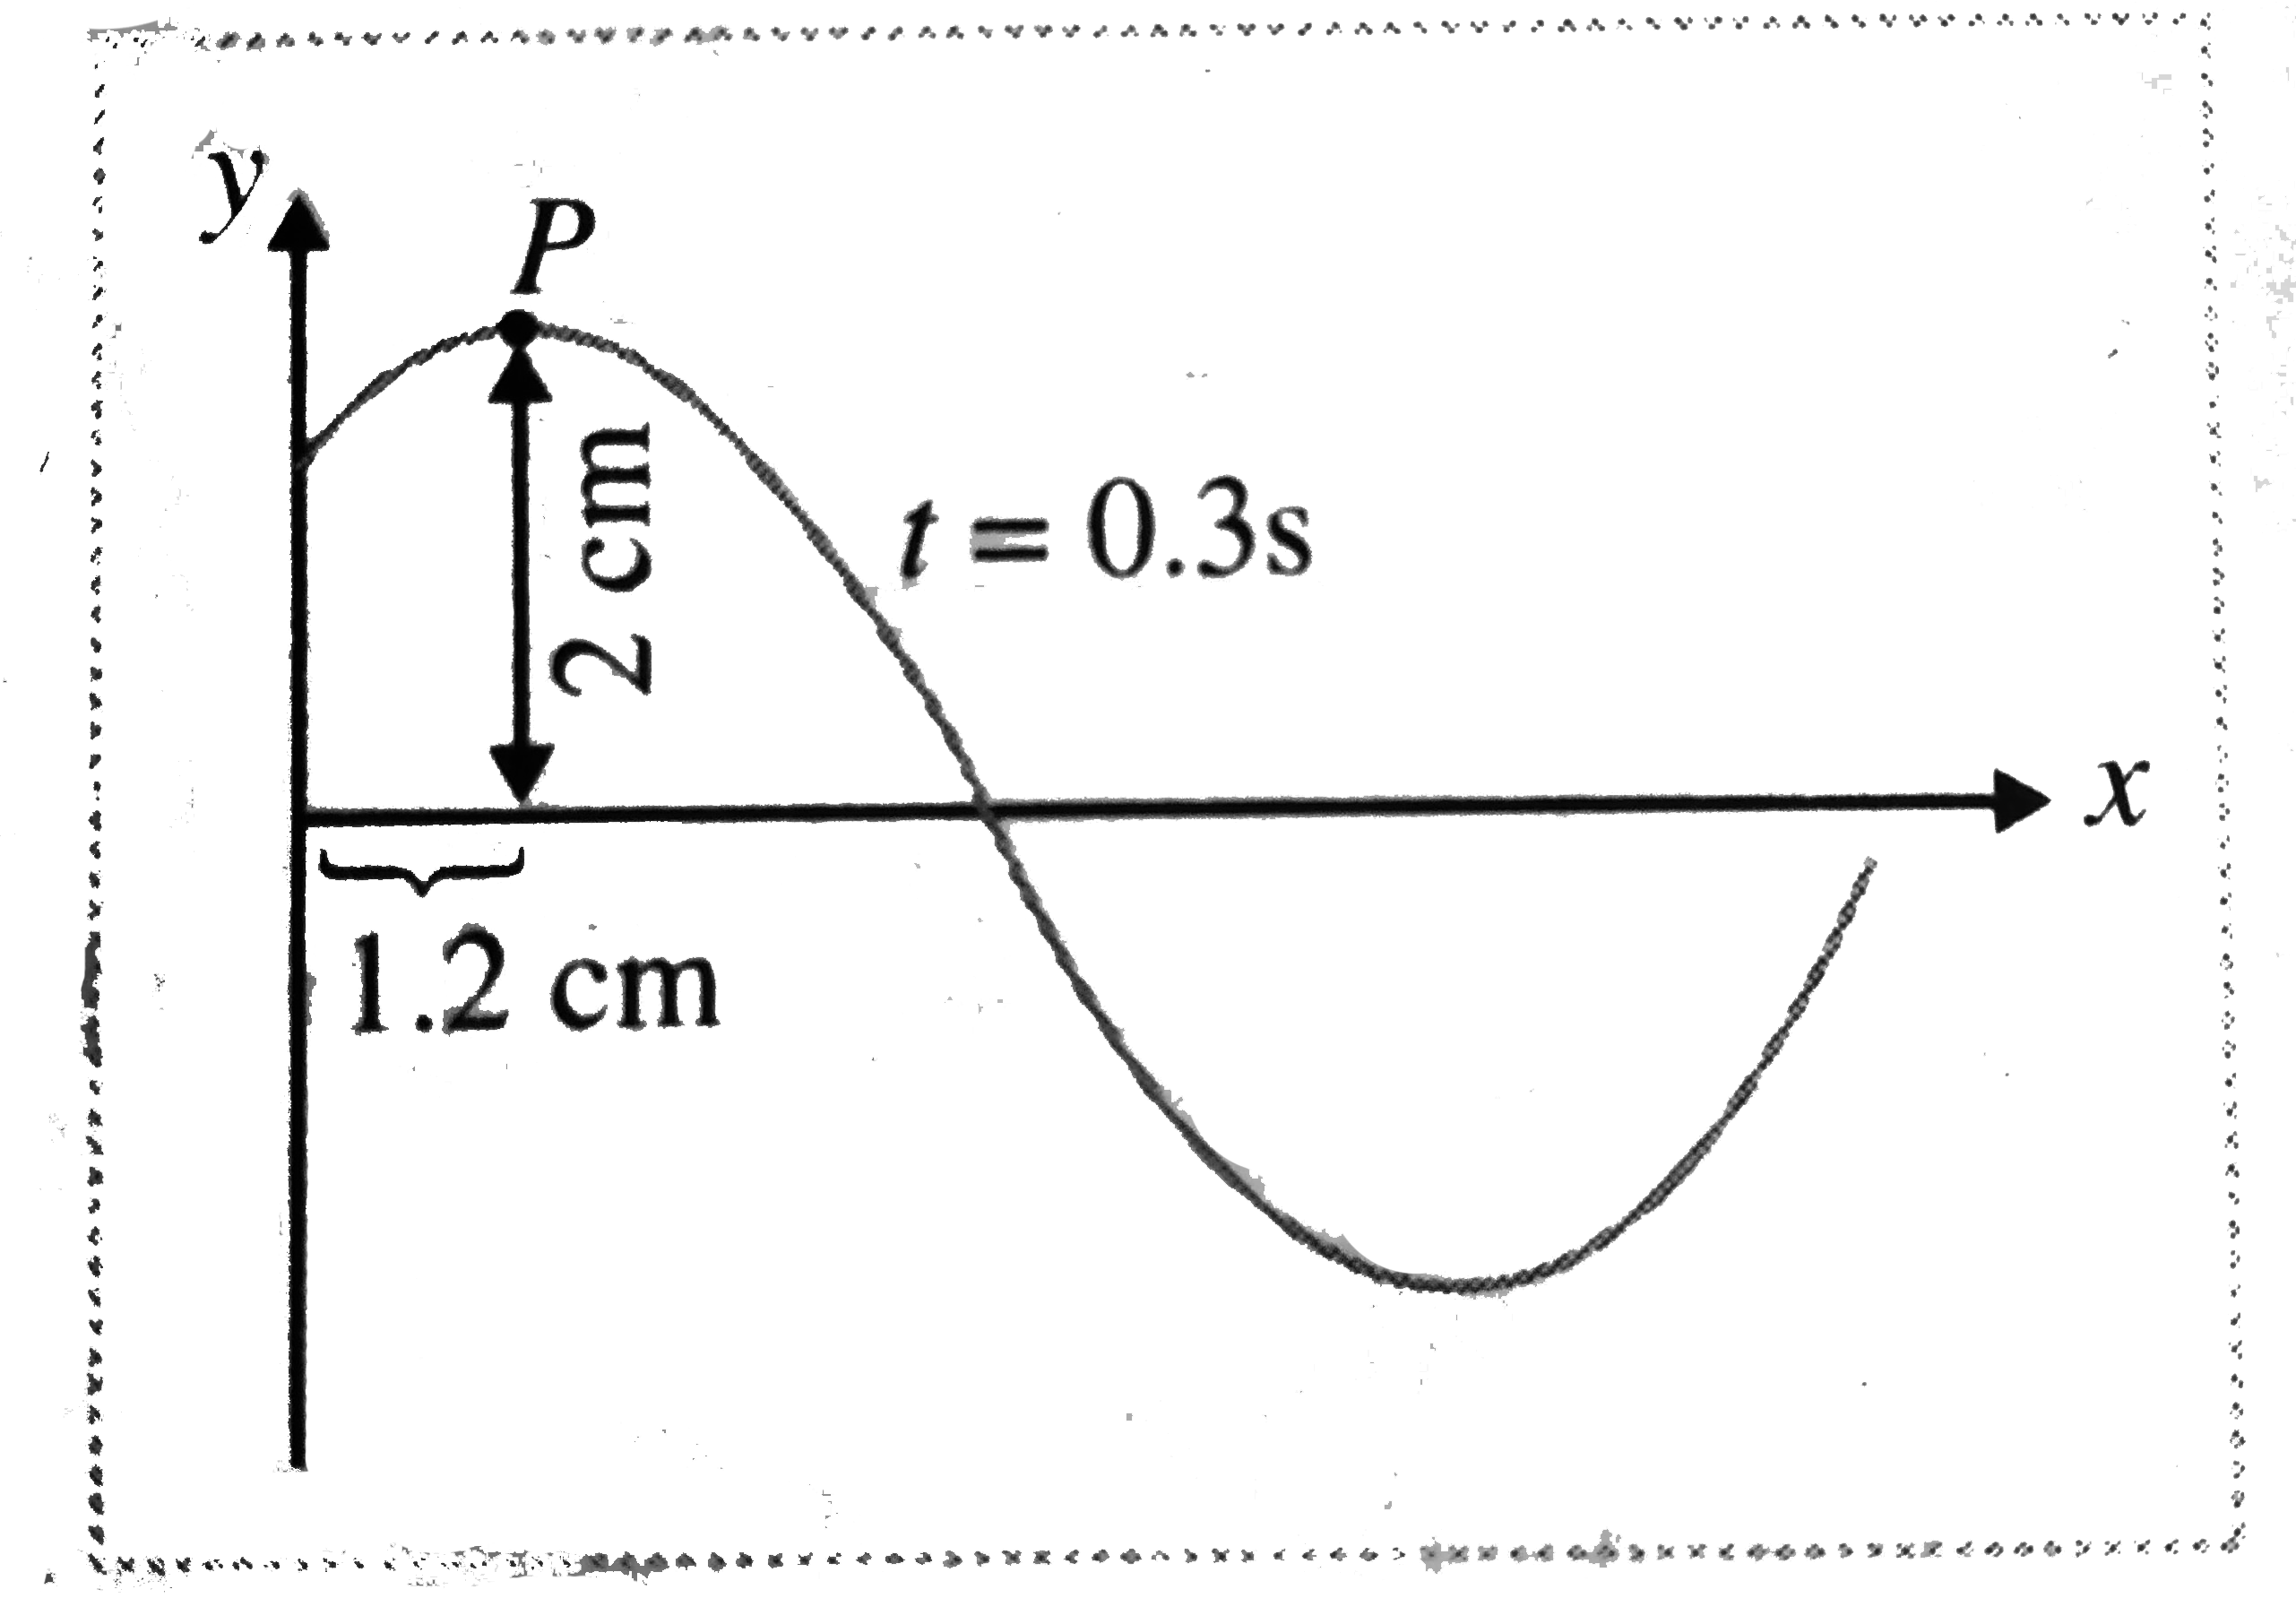 Shows a snapshot of a sinusoidal travelling wave taken at t=0.3s. The wavelength is 7.5 cm and amplitude is 2 cm. if the crest P was at x=0 at t=0, write the equation of travelling wave.